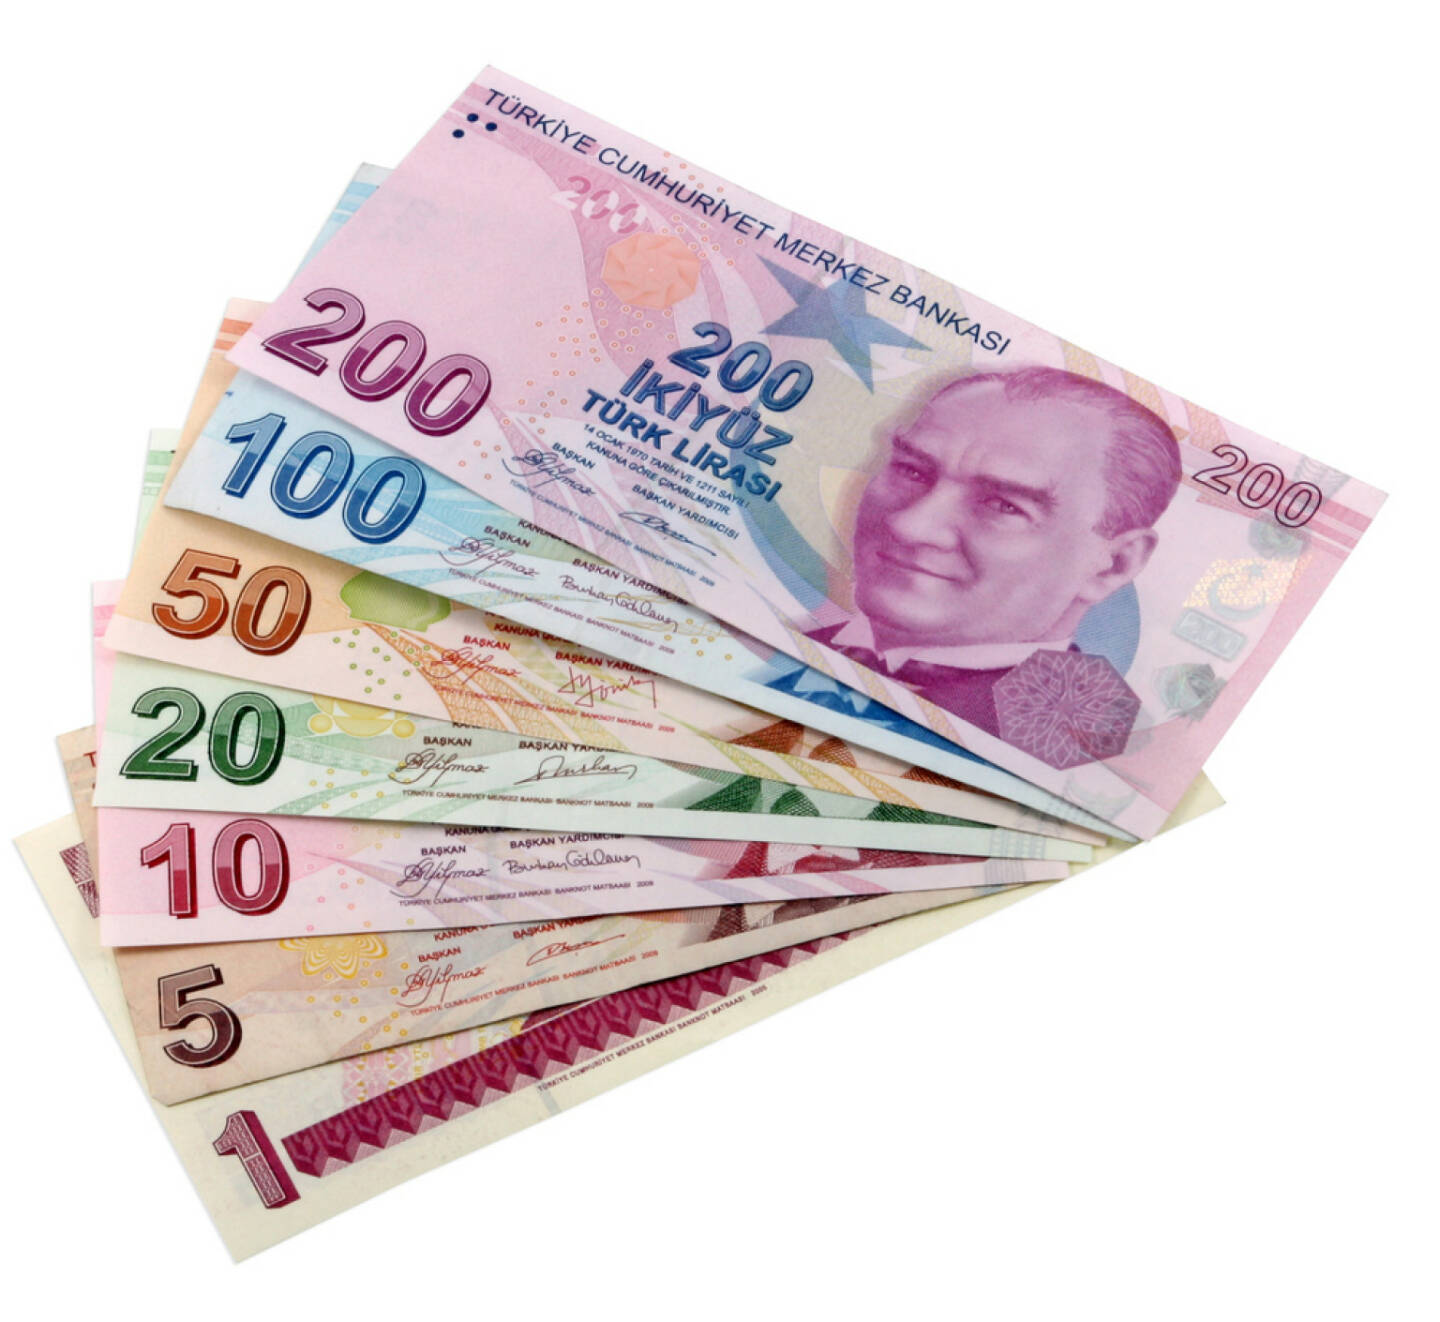 Türkische Lira, http://www.shutterstock.com/de/pic-111284987/stock-photo-isolated-image-of-turkish-lira-coins-and-folded-notes.html